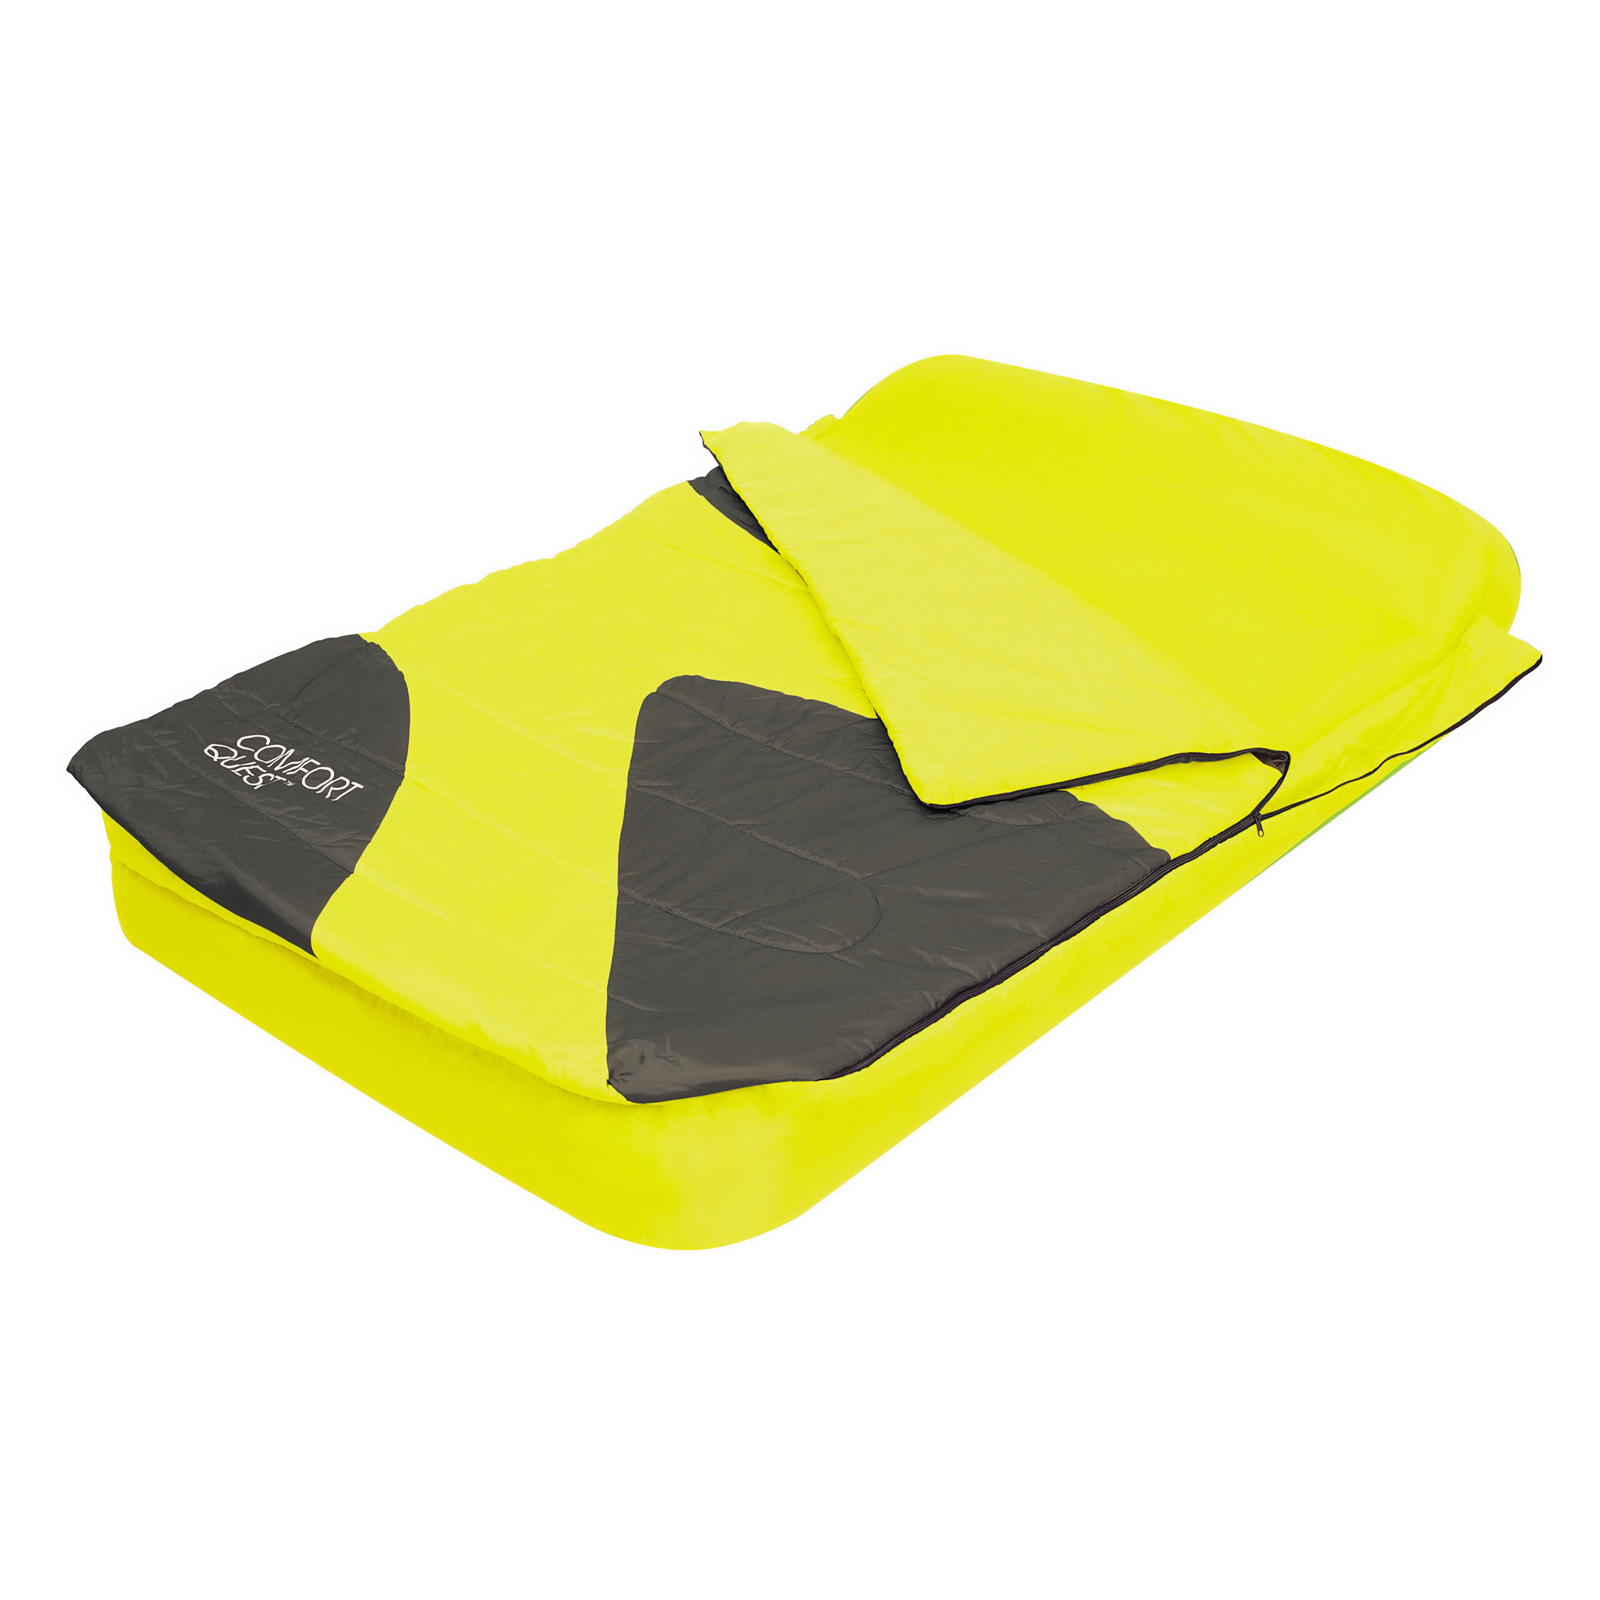 UPC 821808100095 product image for Aslepa Double Airbed - Yellow | upcitemdb.com